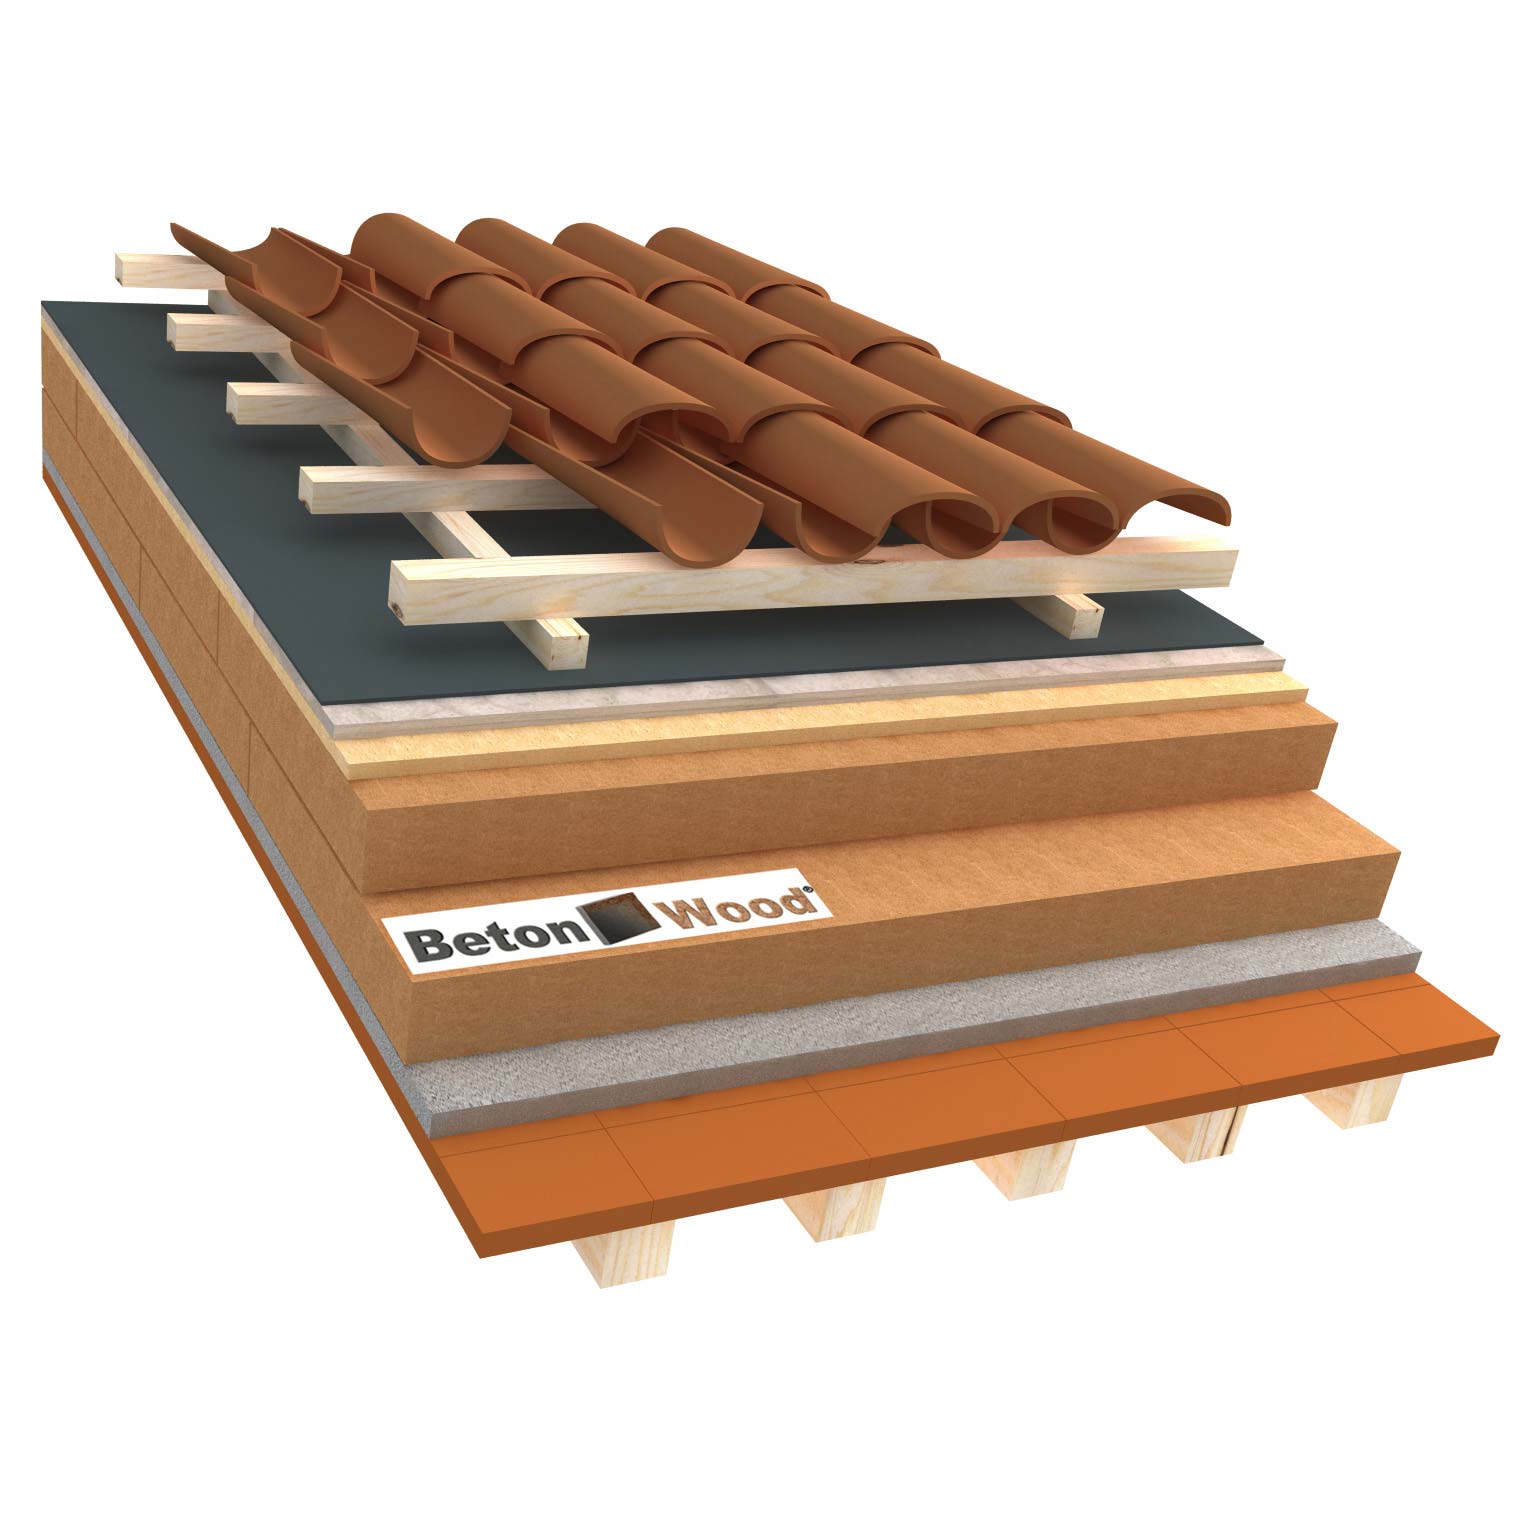 Ventilated roof with wood fiber Isorel, Therm SD and cement bonded particle boards on terracotta tiles